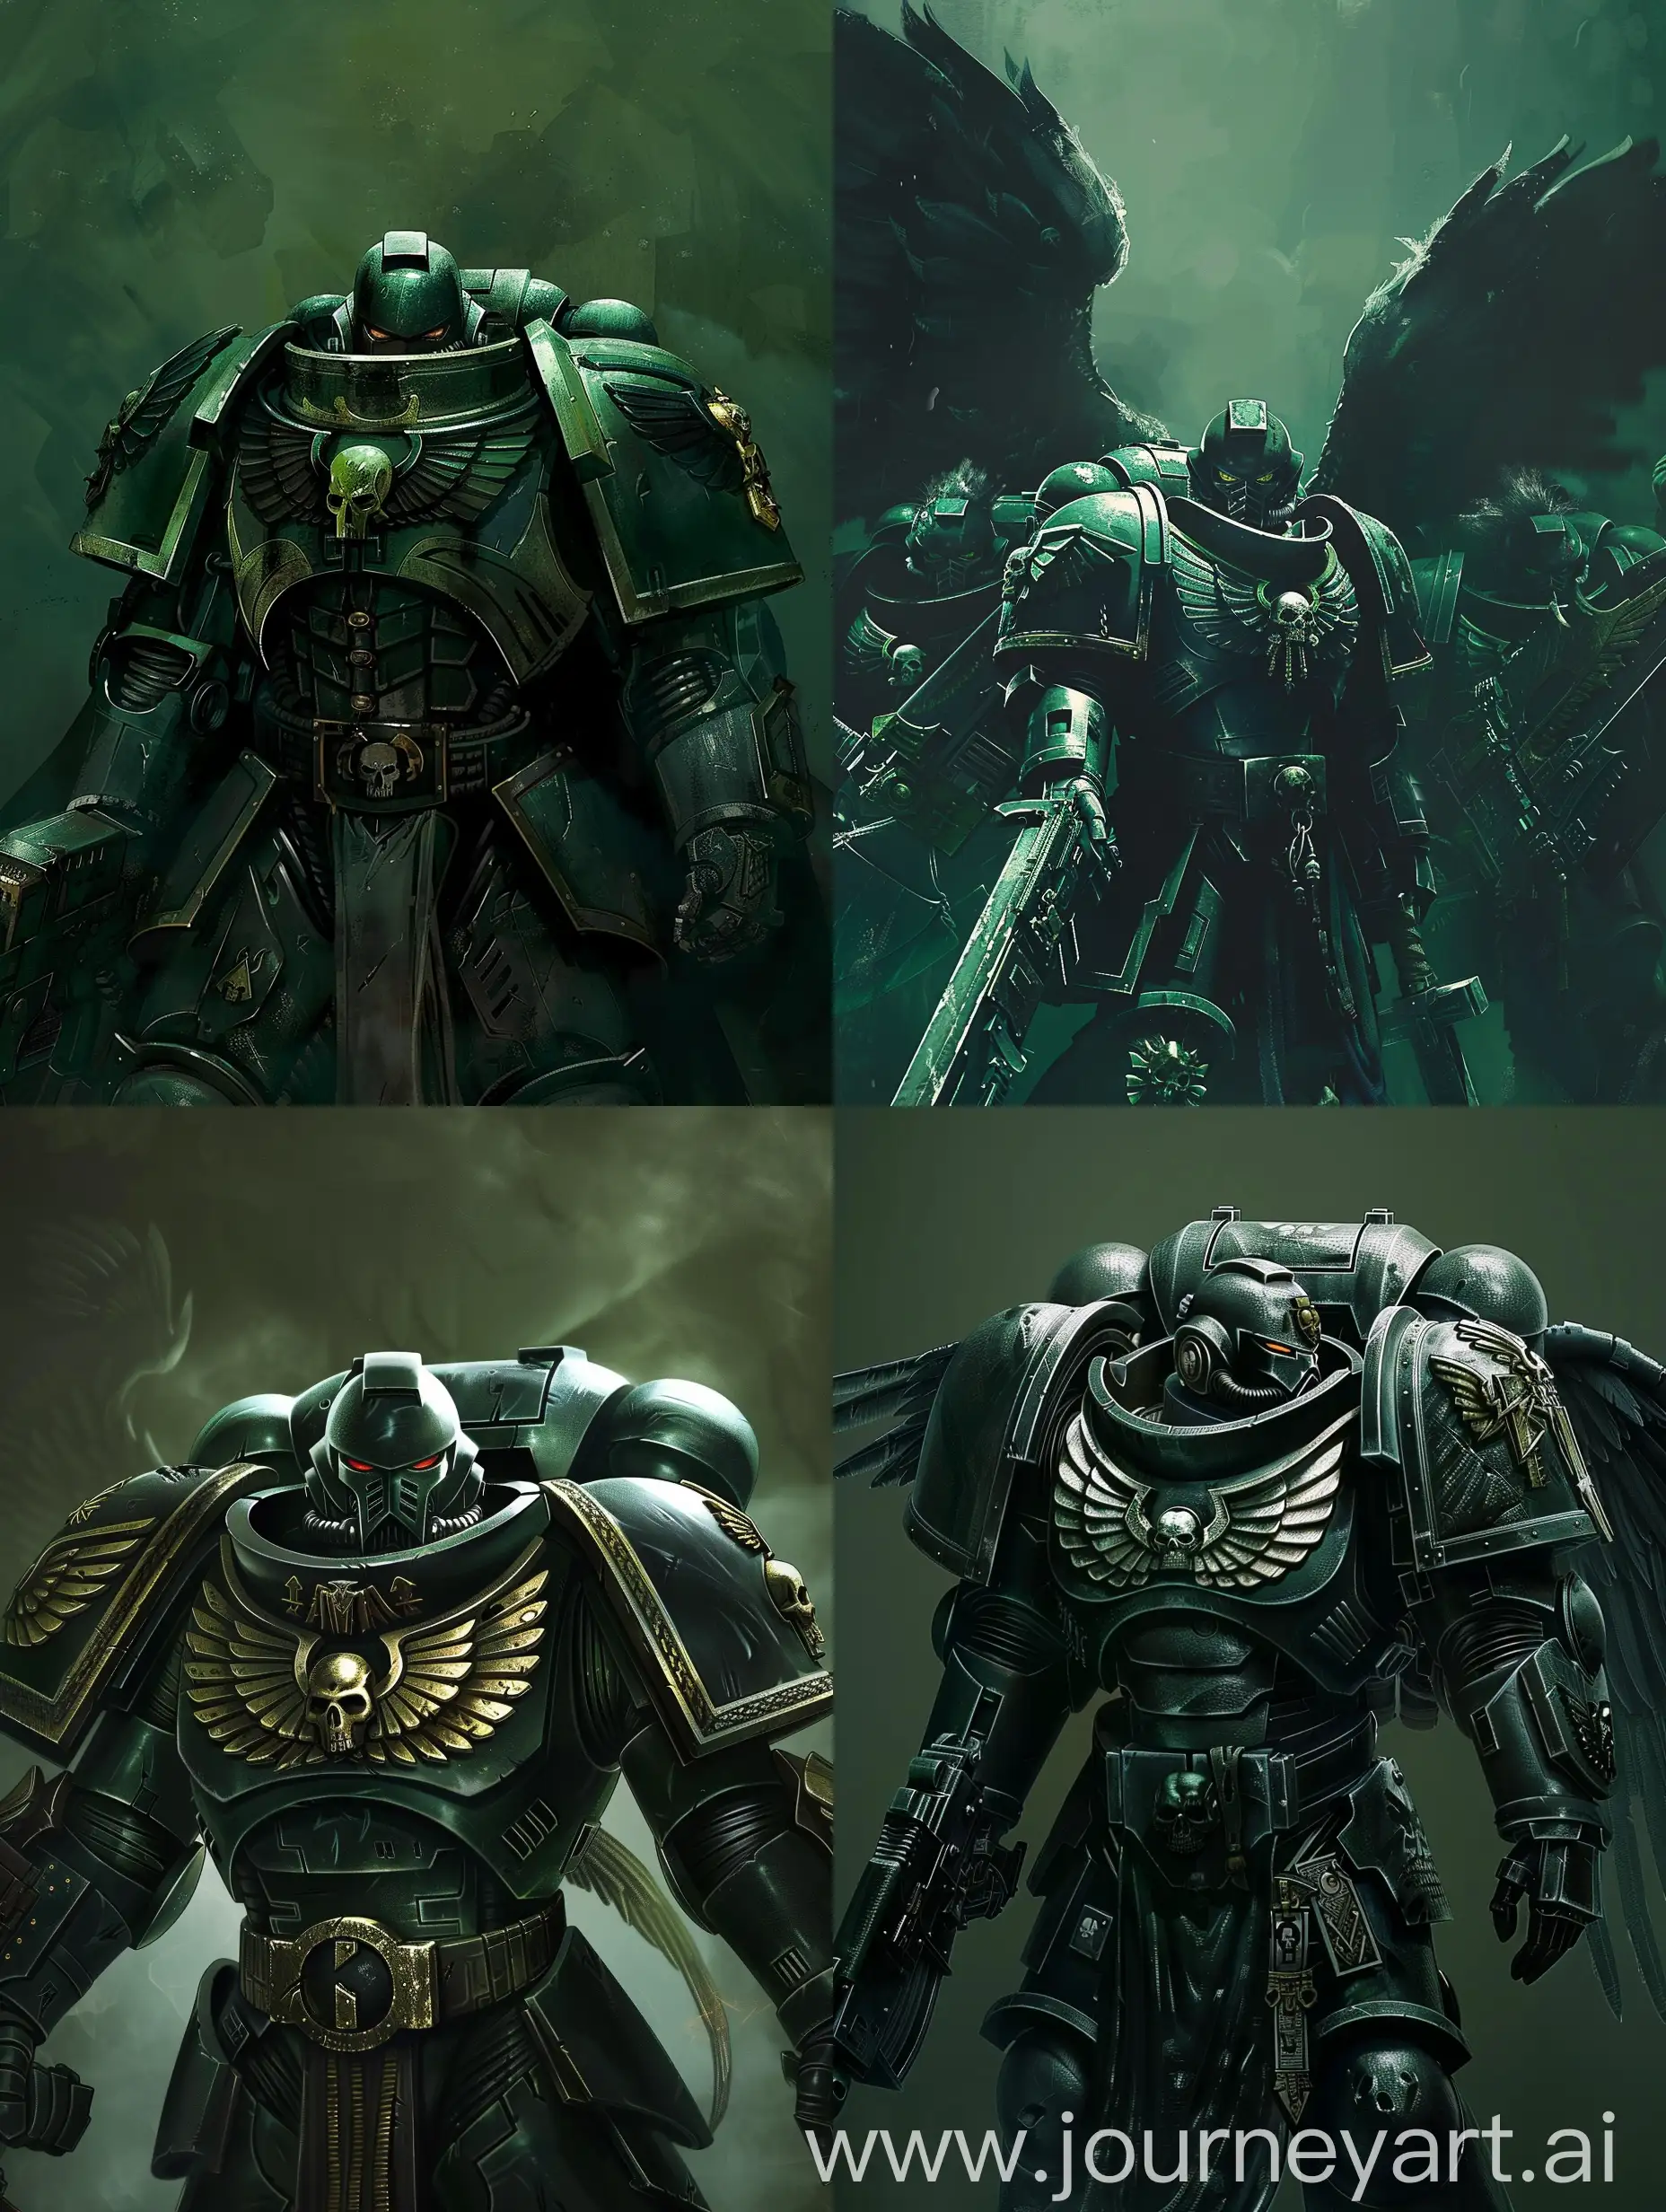 The Dark Angels from the Warhammer 40k universe. The background is dark green.